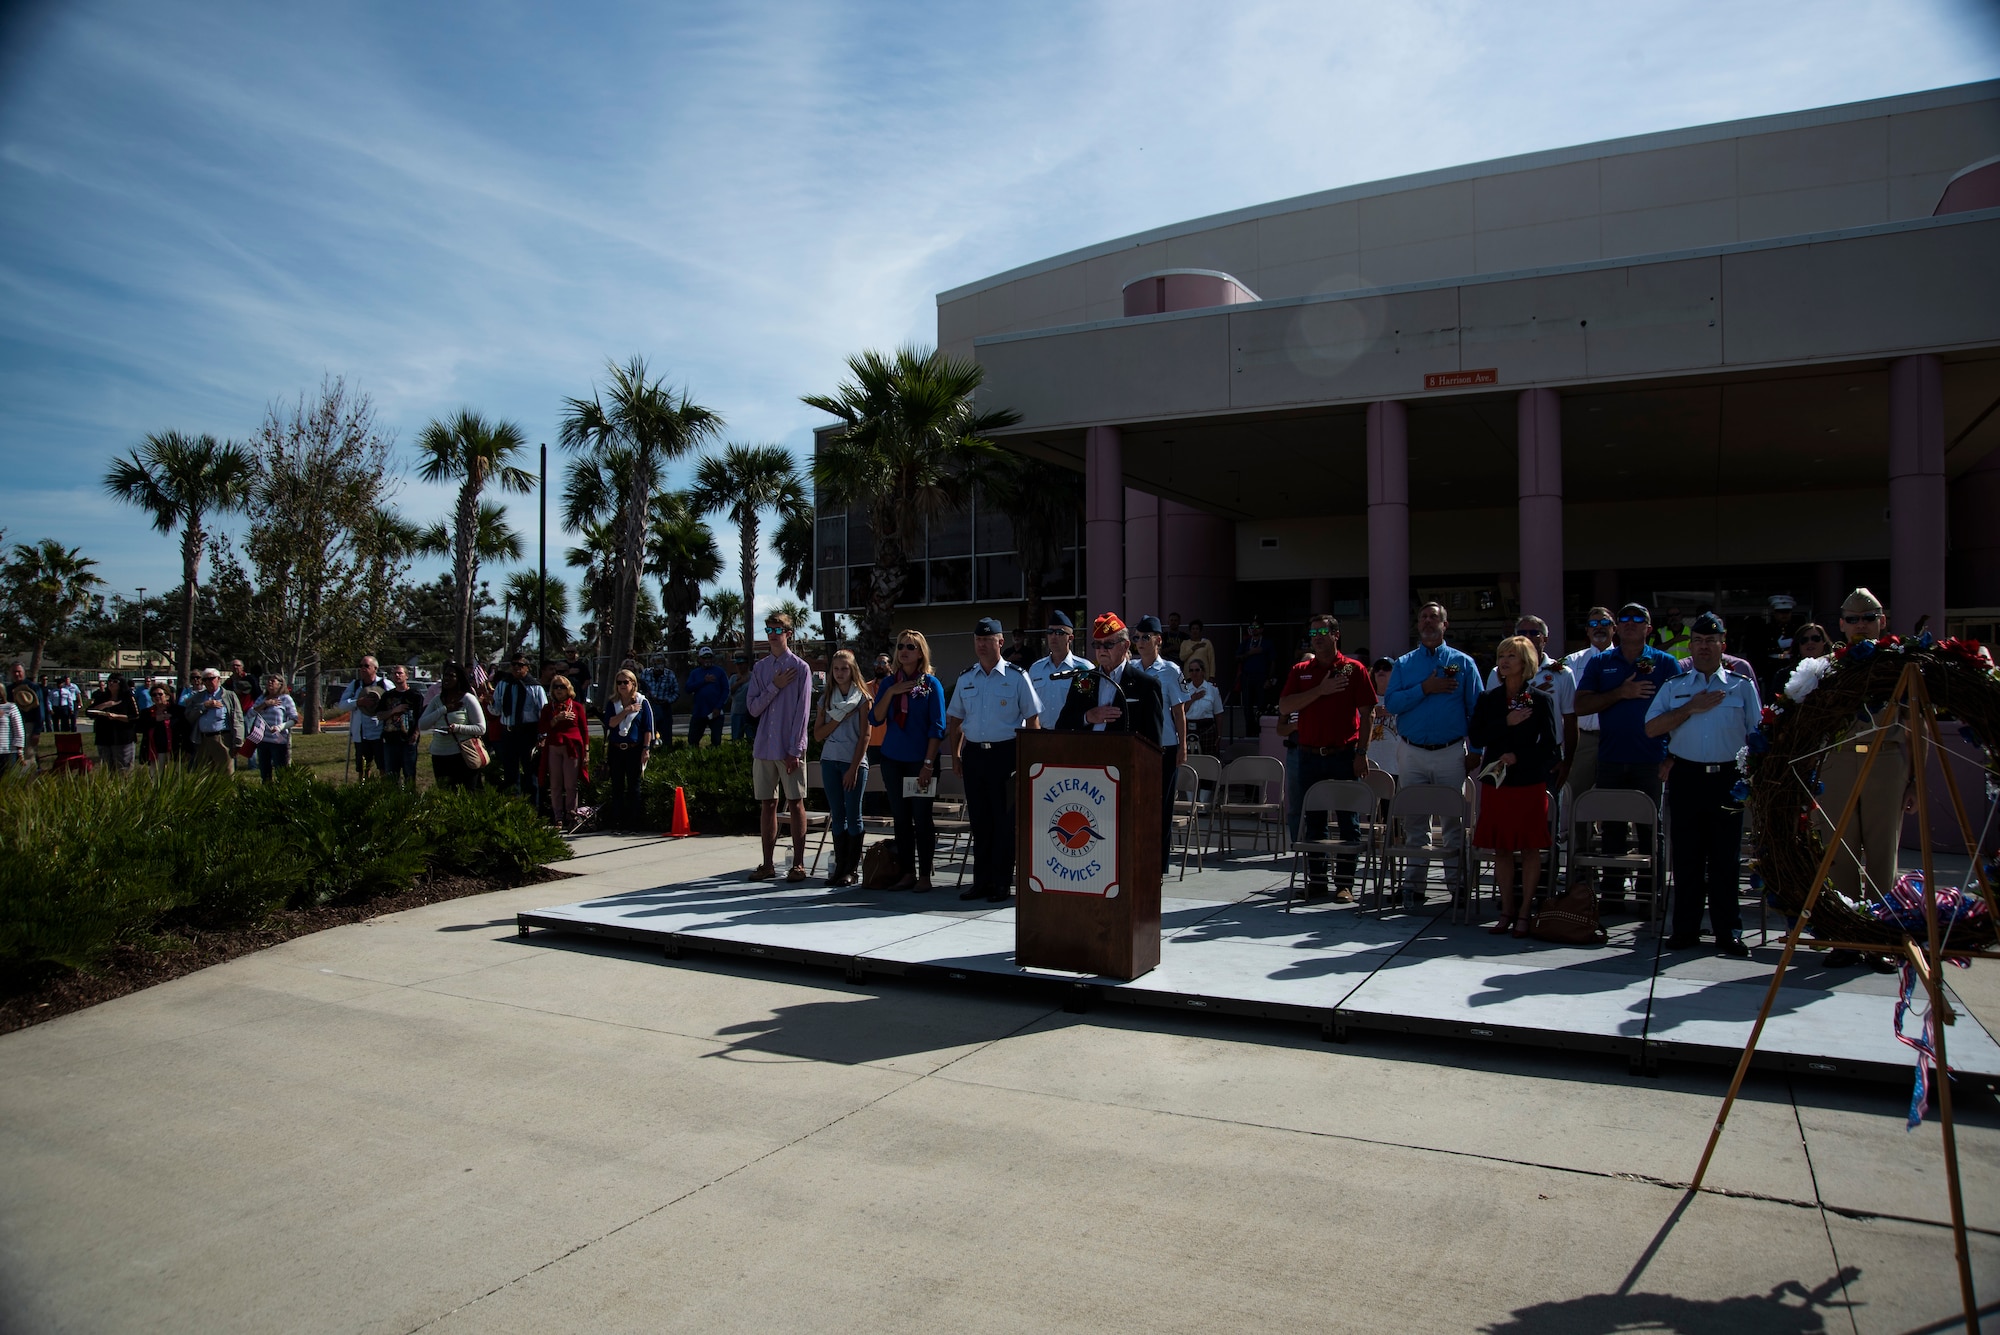 A master of ceremony delivers a speech at a Veterans Day parade celebration and wreath laying ceremony on Nov. 11, 2019, at Panama City, Florida. The annual event celebrated those who served in the past and to honor the sacrifices made by the service member as well as their families, both at home and abroad. The ceremony showcased significant songs, such as God Bless America and the National Anthem, and the wreath was put at the foot of the flag by a three-man team represented by the U.S. Navy and the Marines. (U.S. Air Force photo by Staff Sgt. Magen M. Reeves)